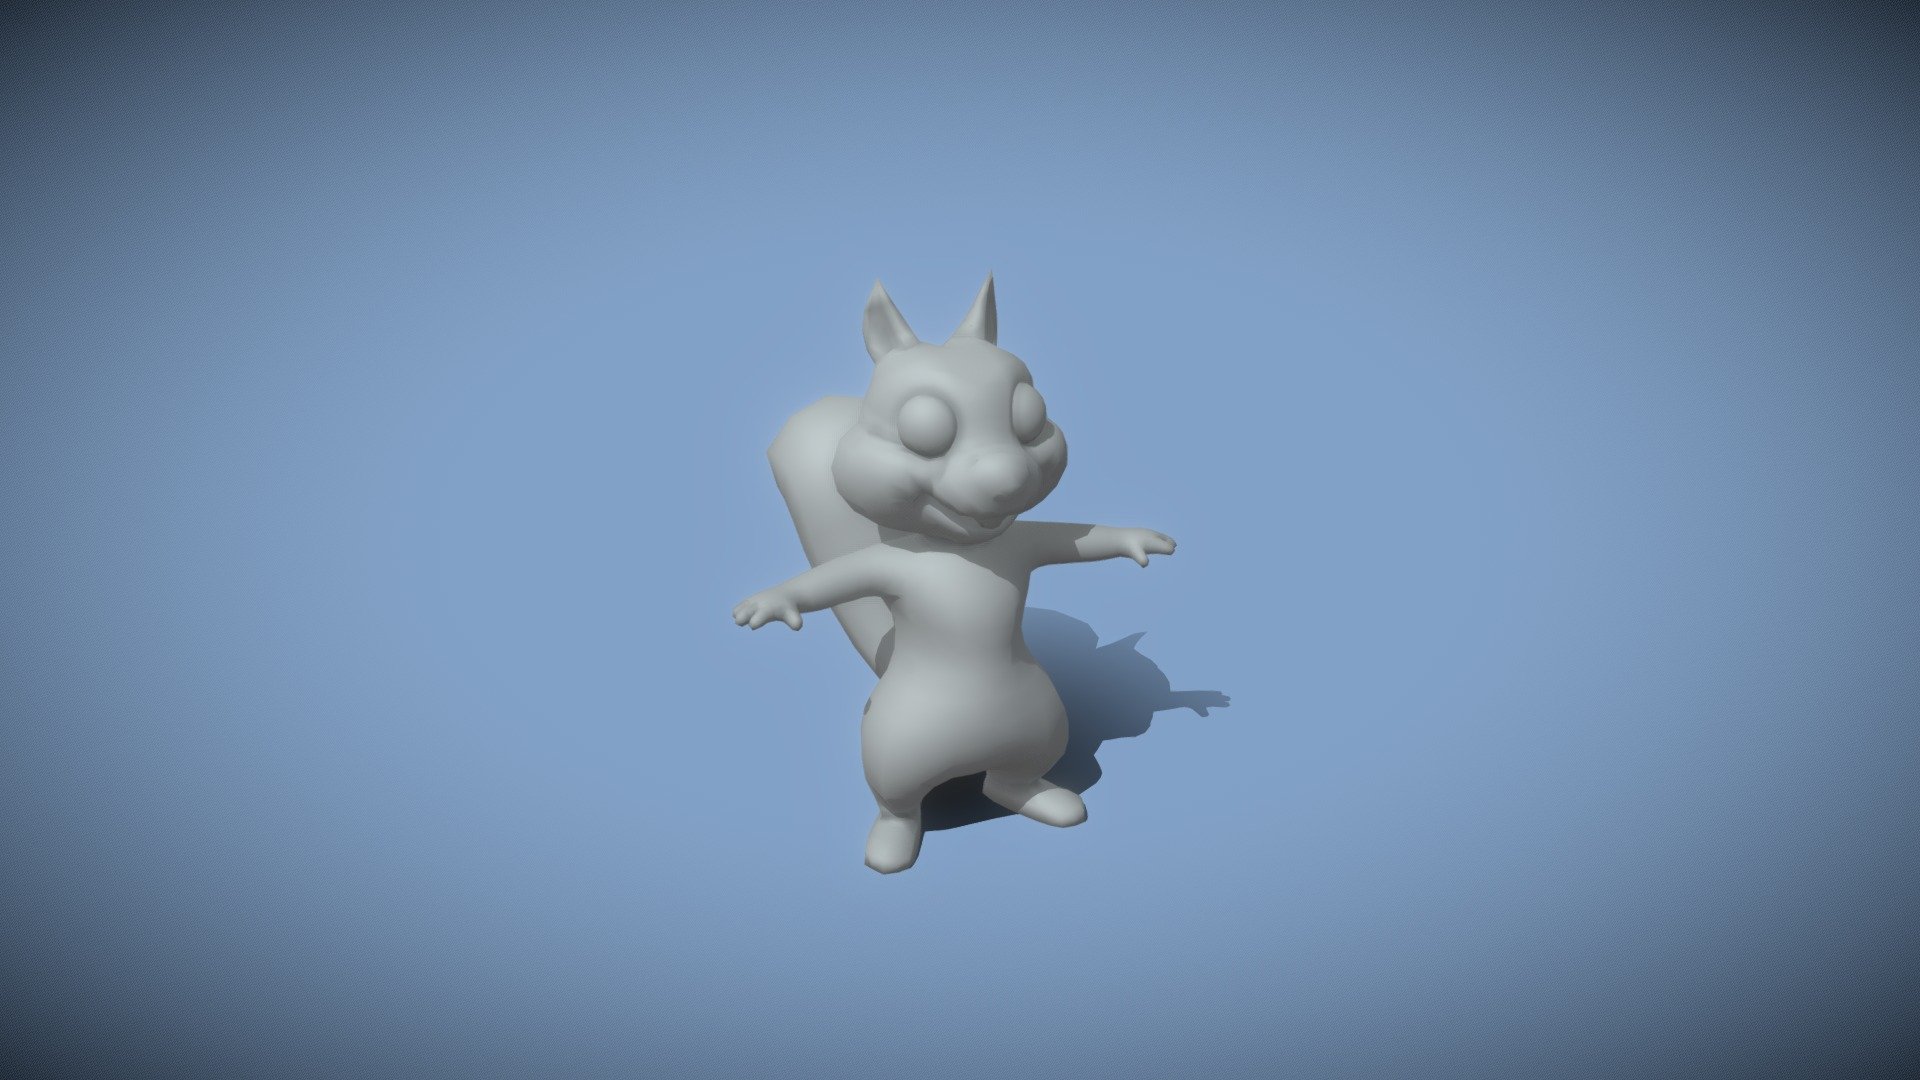 Cartoon Squirrel Rigged Base Mesh 3D Model is completely ready to be used as a starting point to develop your characters.  

Good topology ready for animation.  

Technical details:  




File formats included in the package are: FBX, GLB, BLEND, gLTF (generated), USDZ (generated)

Native software file format: BLEND

Render engine: Eevee

Polygons: 2,164

Vertices: 1,761

The model is rigged.
 - Cartoon Squirrel Rigged Base Mesh 3D Model - Buy Royalty Free 3D model by 3DDisco 3d model